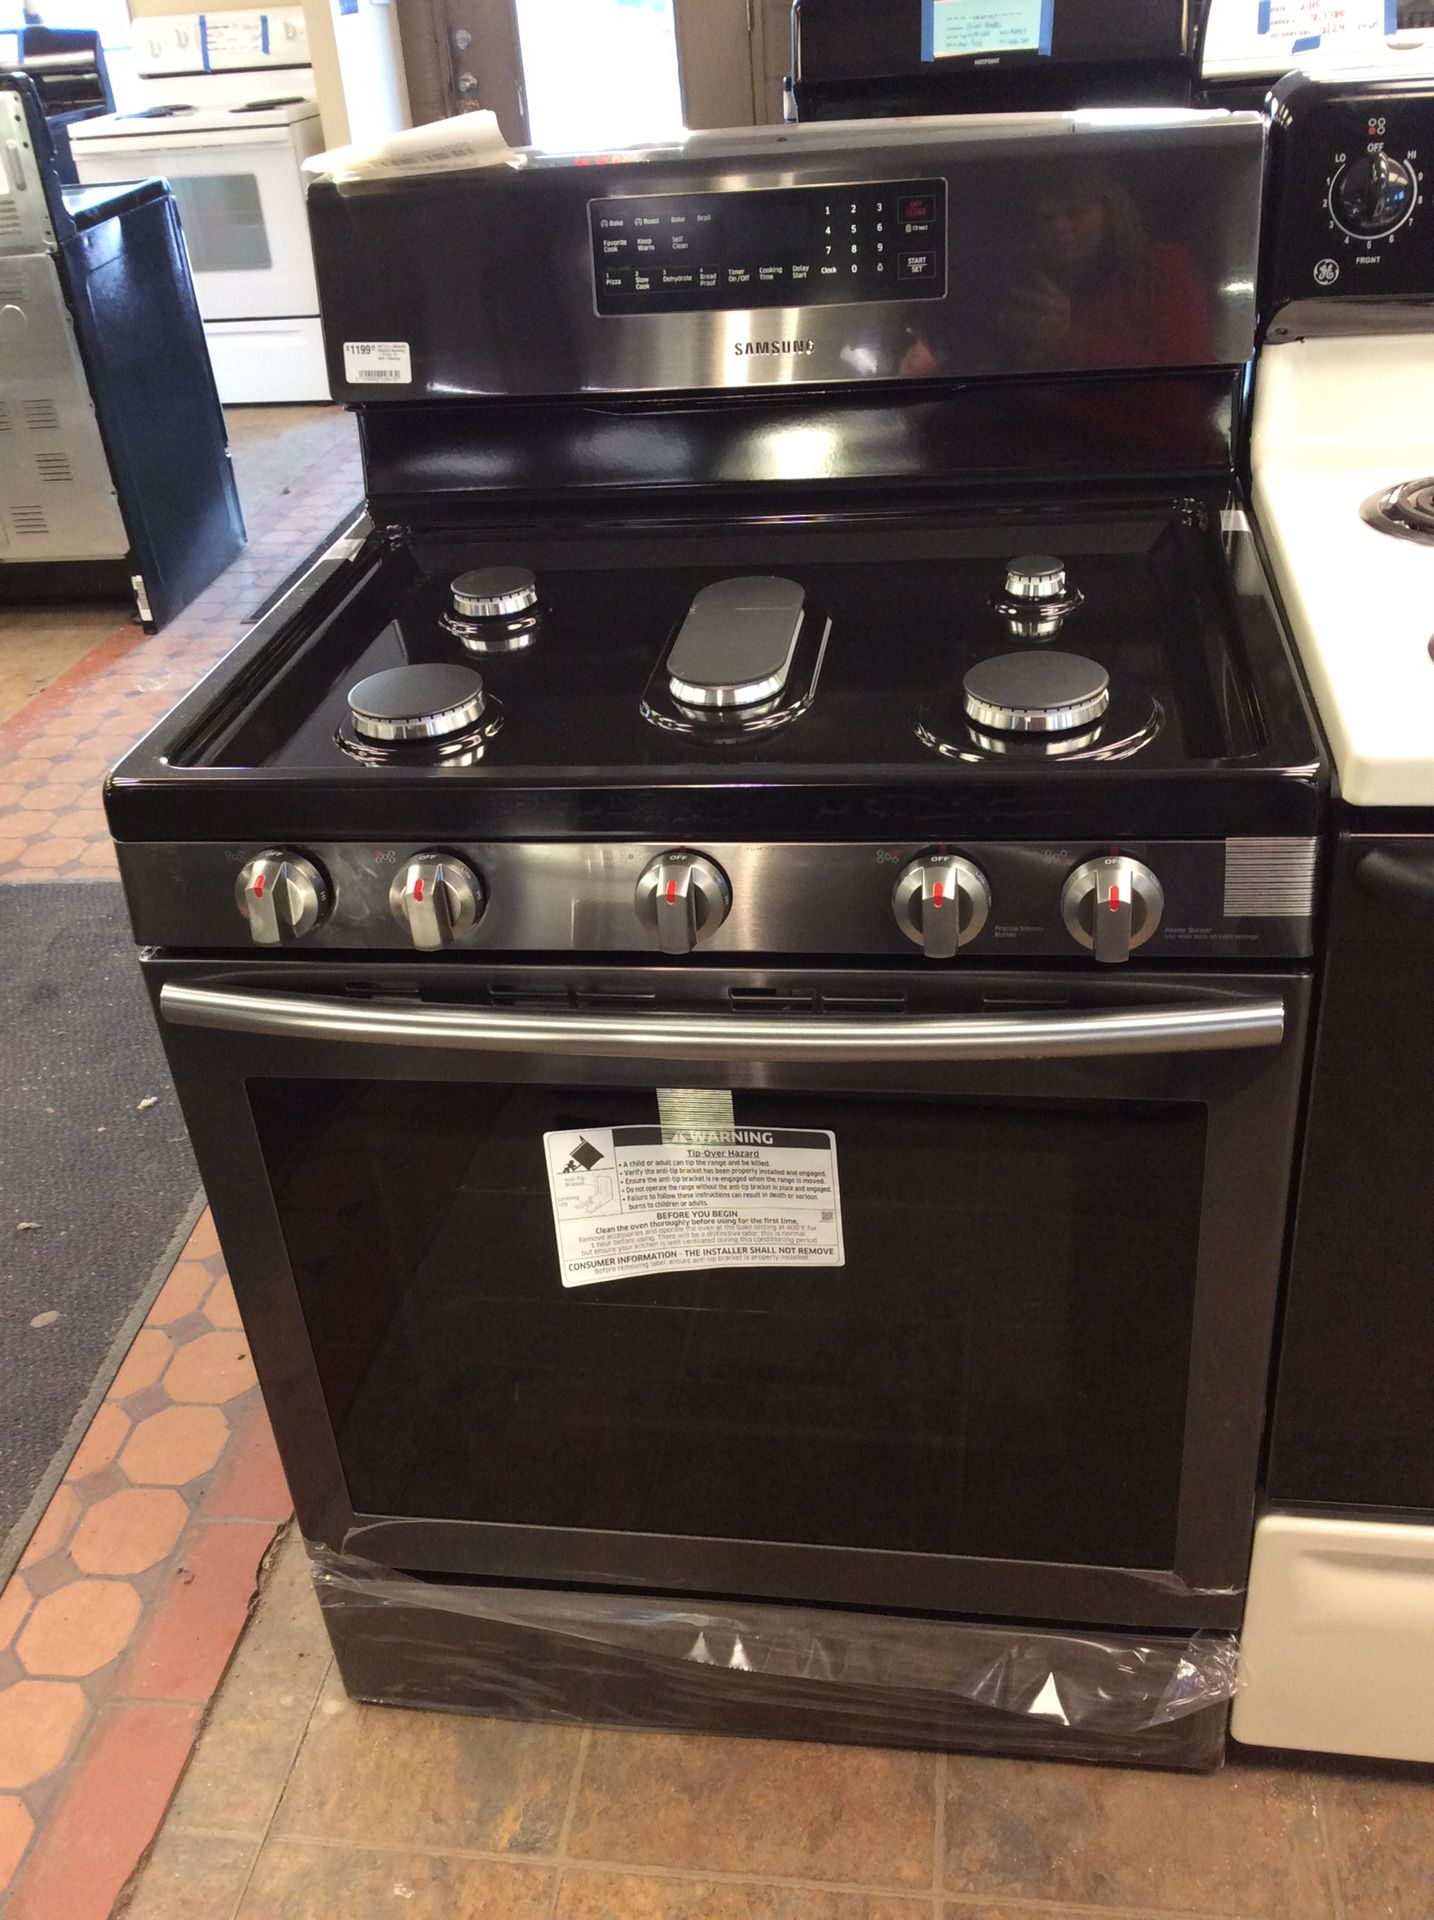 (Anoka 207VFP LM) Samsung Black Stainless Steel 5 Burner Gas Stove With Convection